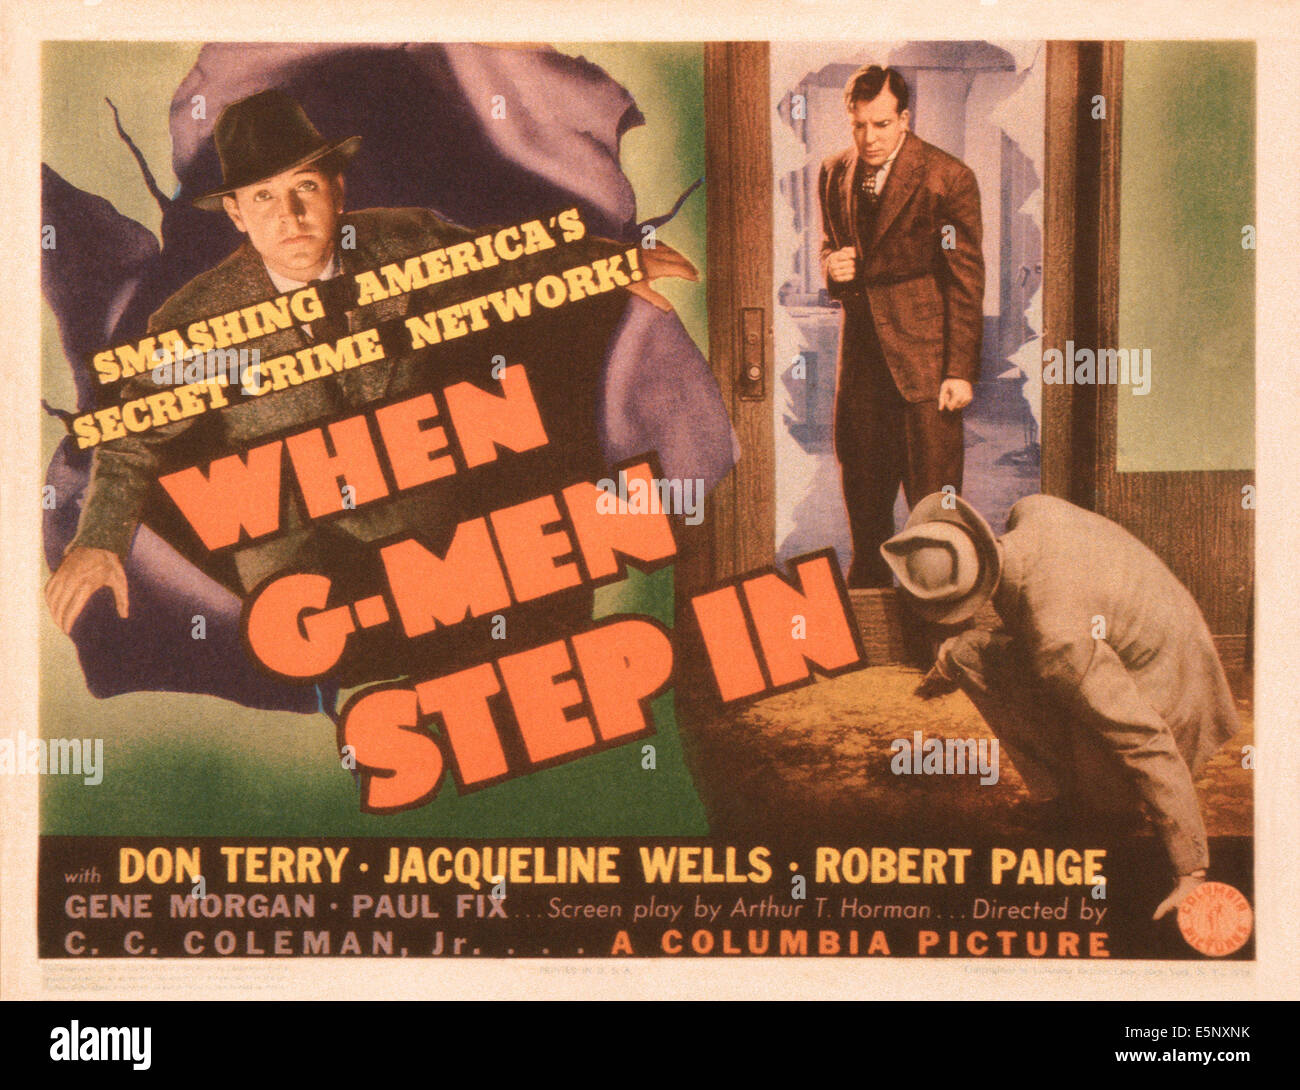 WHEN G-MEN STEP IN, US lobbycard, Robert Paige (top left), 1938 Stock Photo